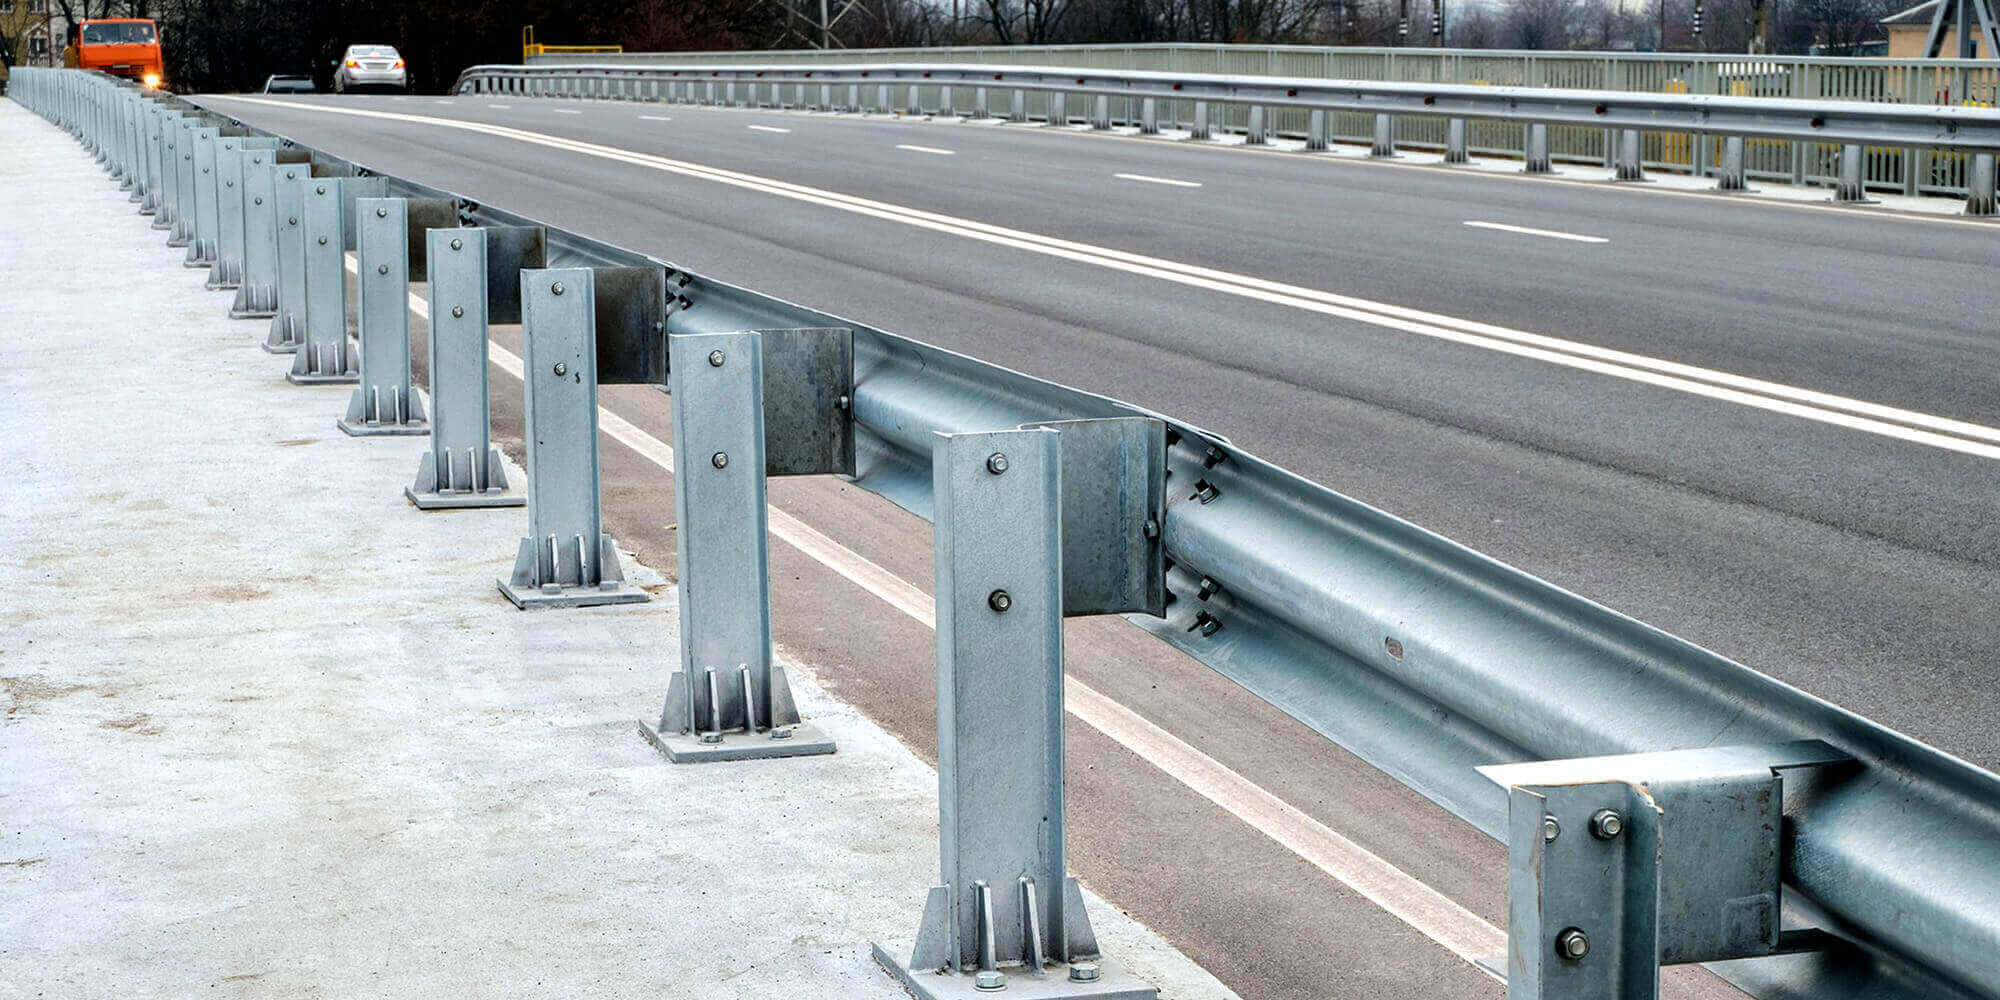 Understanding Armco Safety Barriers: What is it and What are they used for?